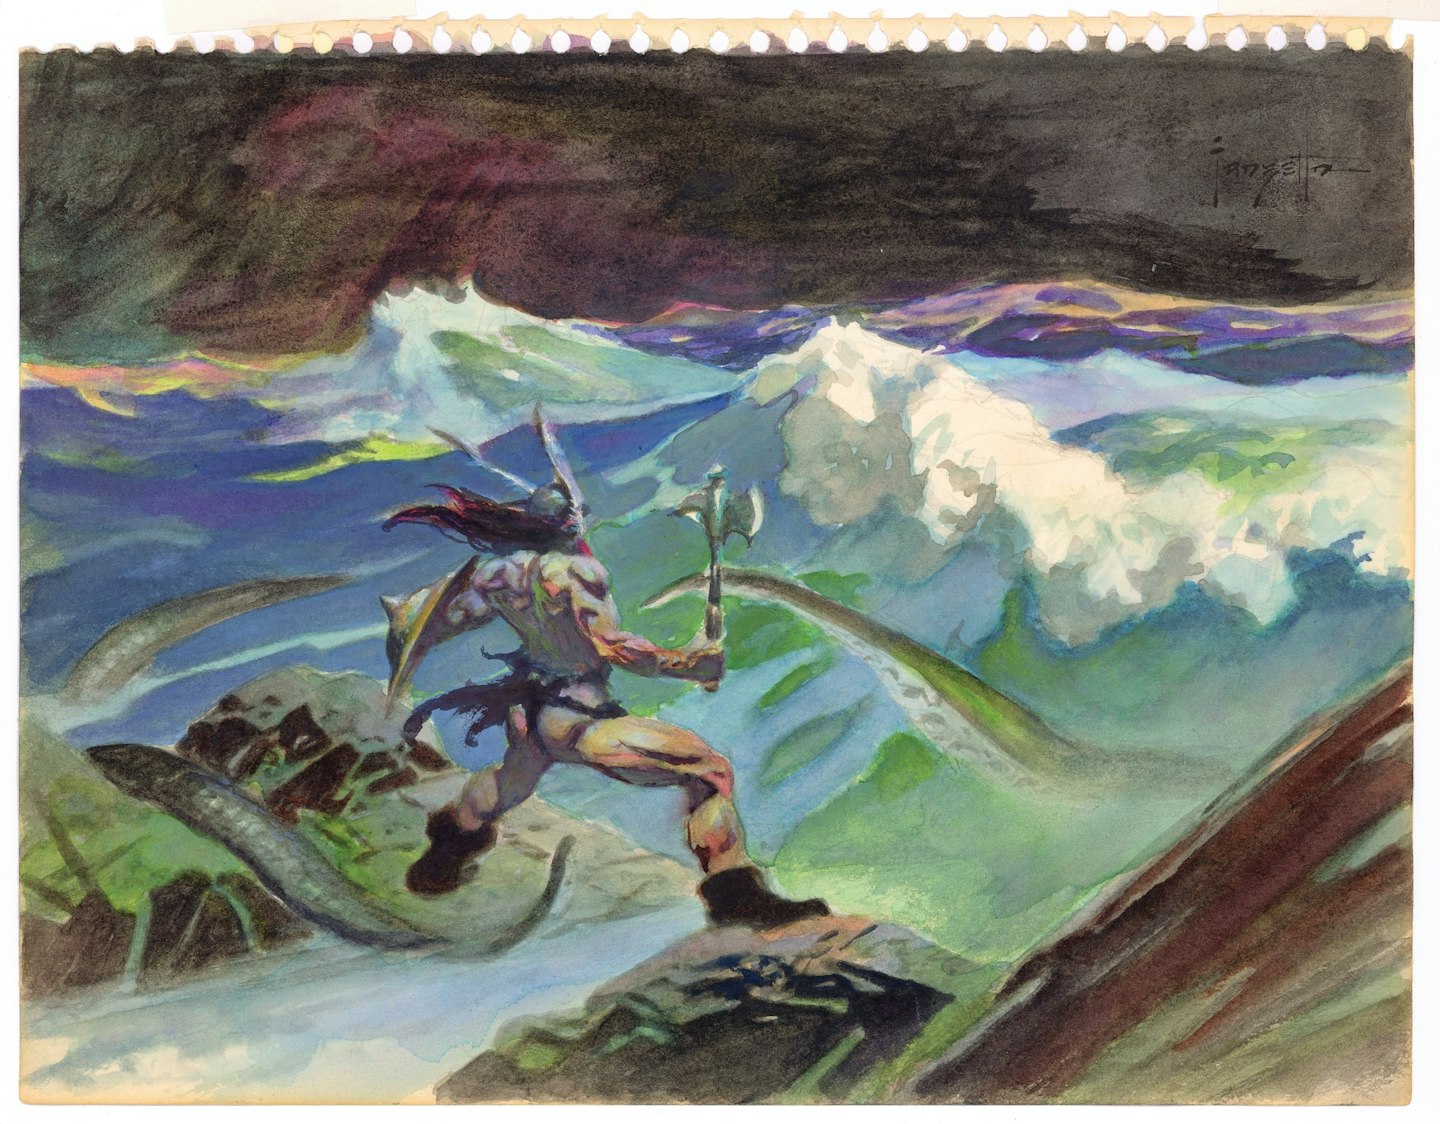 Conan and the Savage Sea by Frank Frazetta